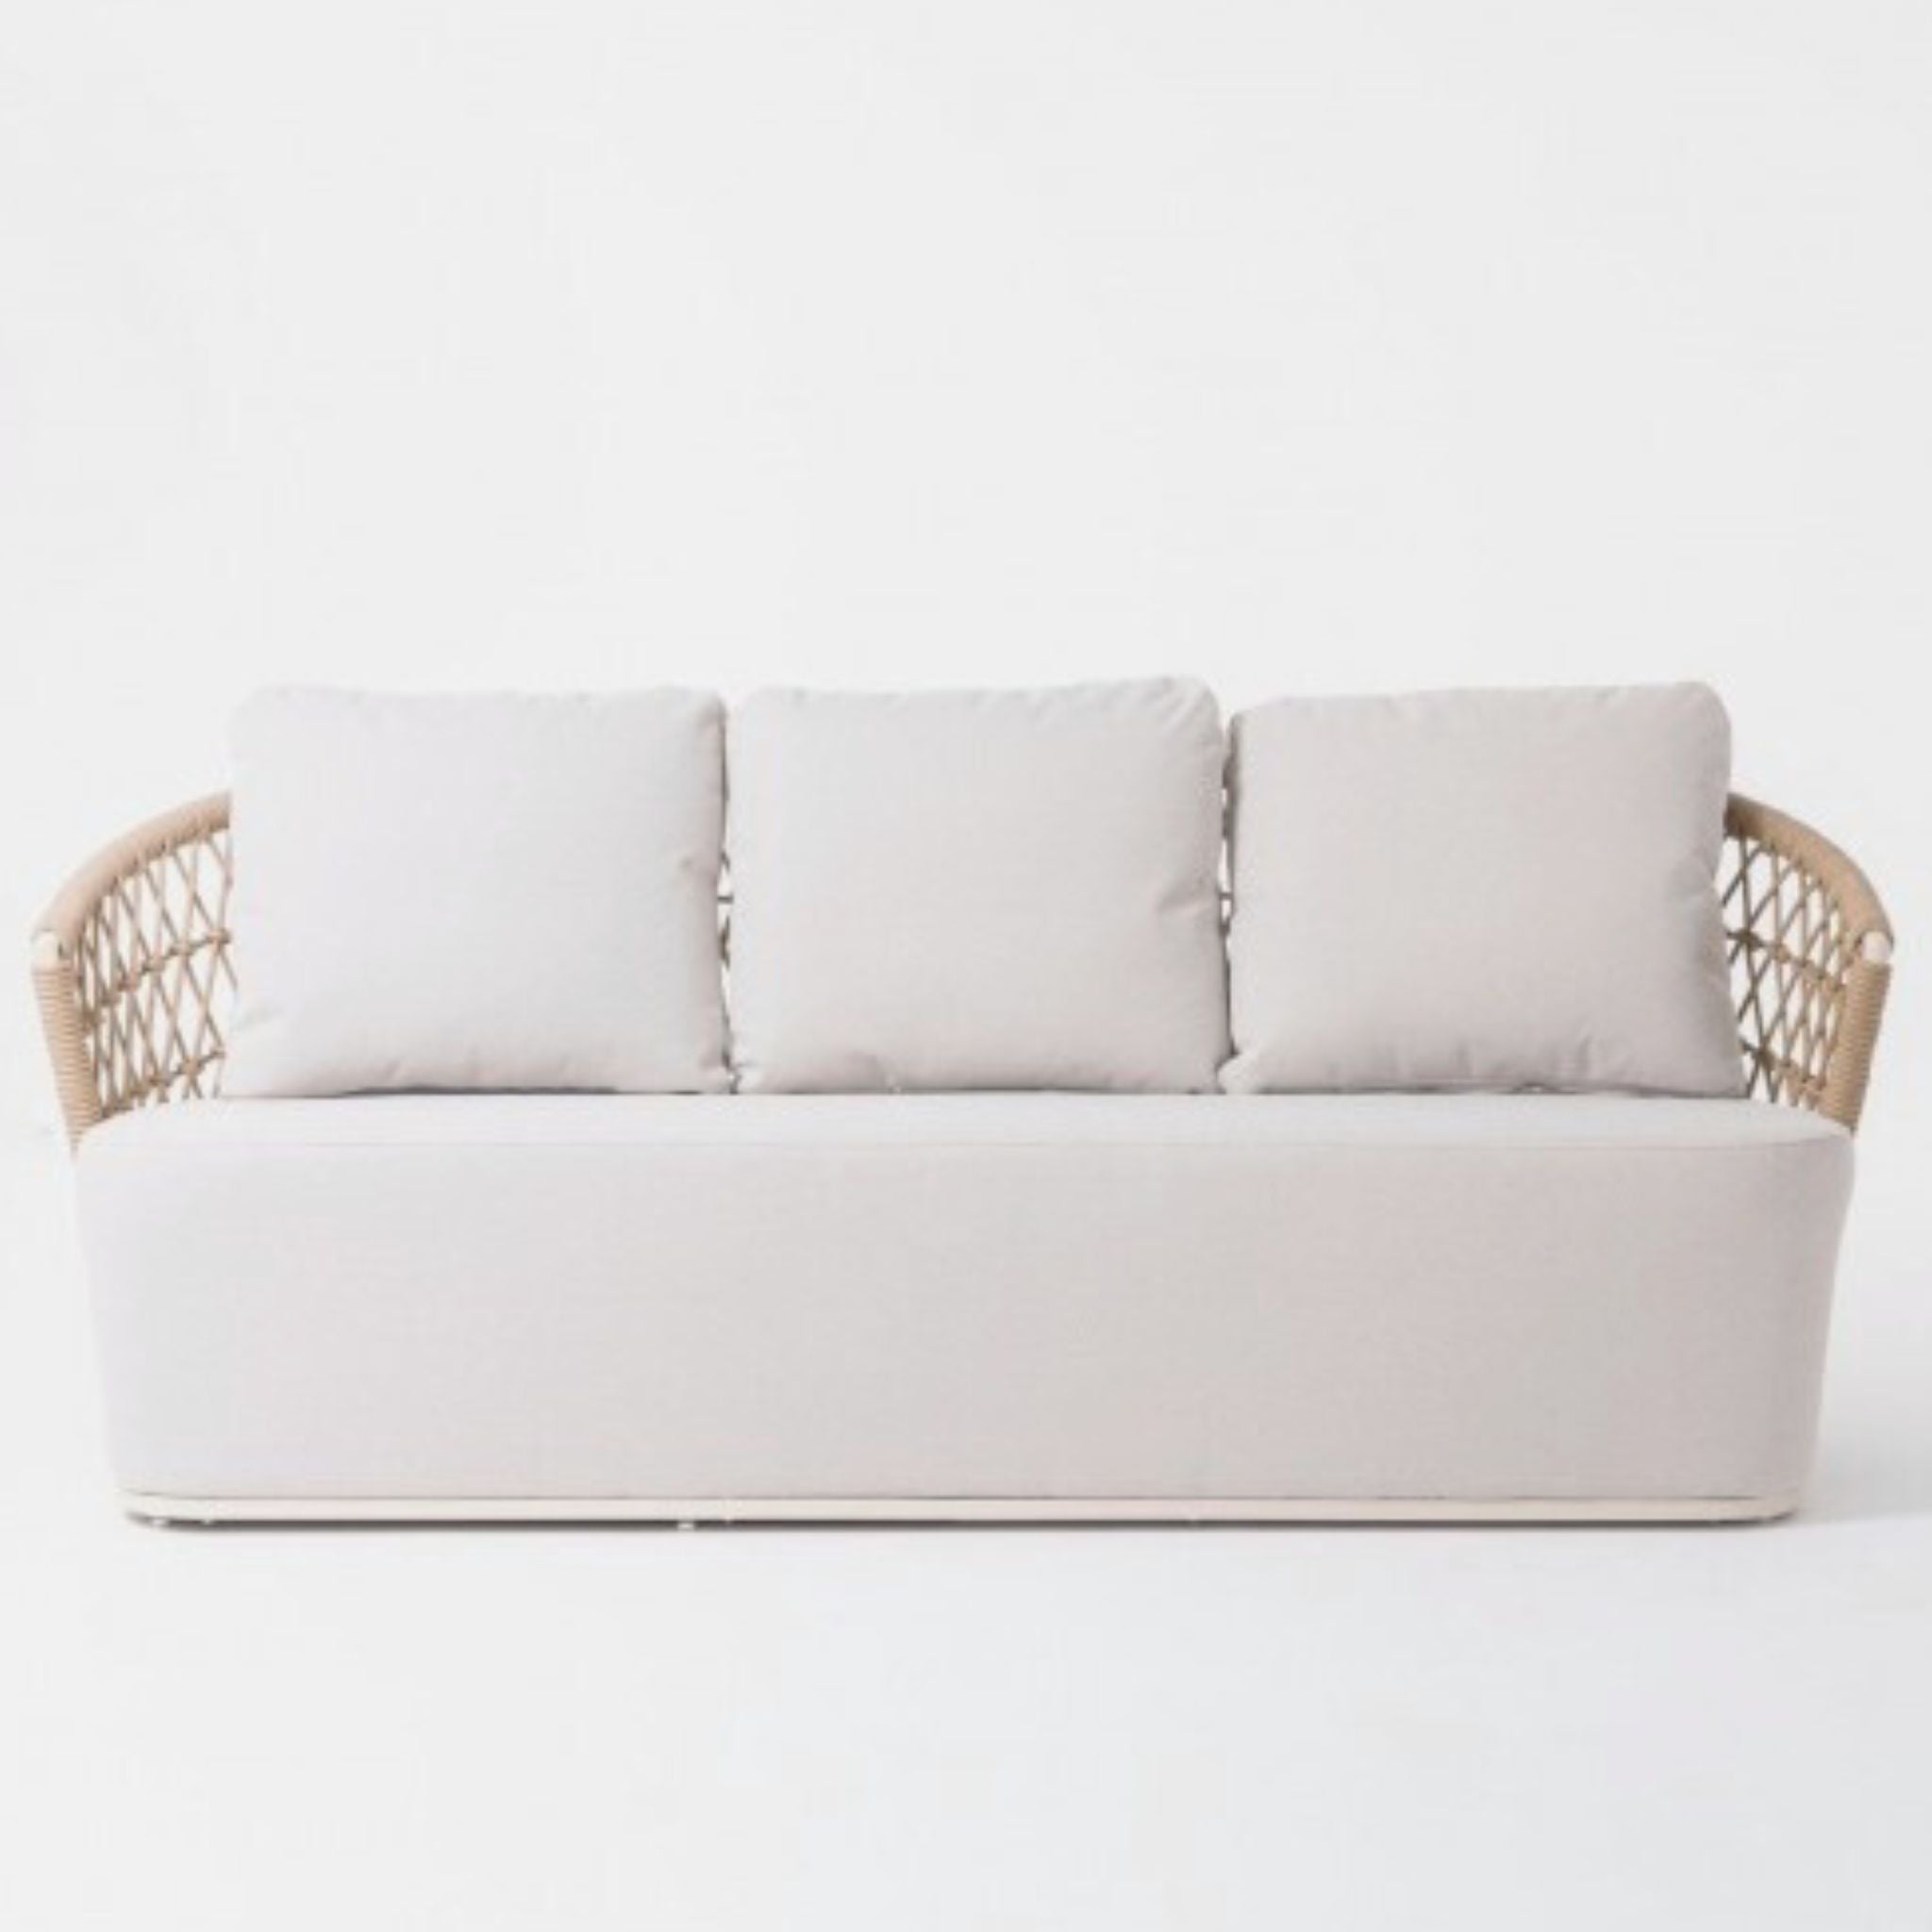 Crisal Decoracion Isquia-1 Sofa With Network Structure Rope And Aluminum - ModernistaLiving